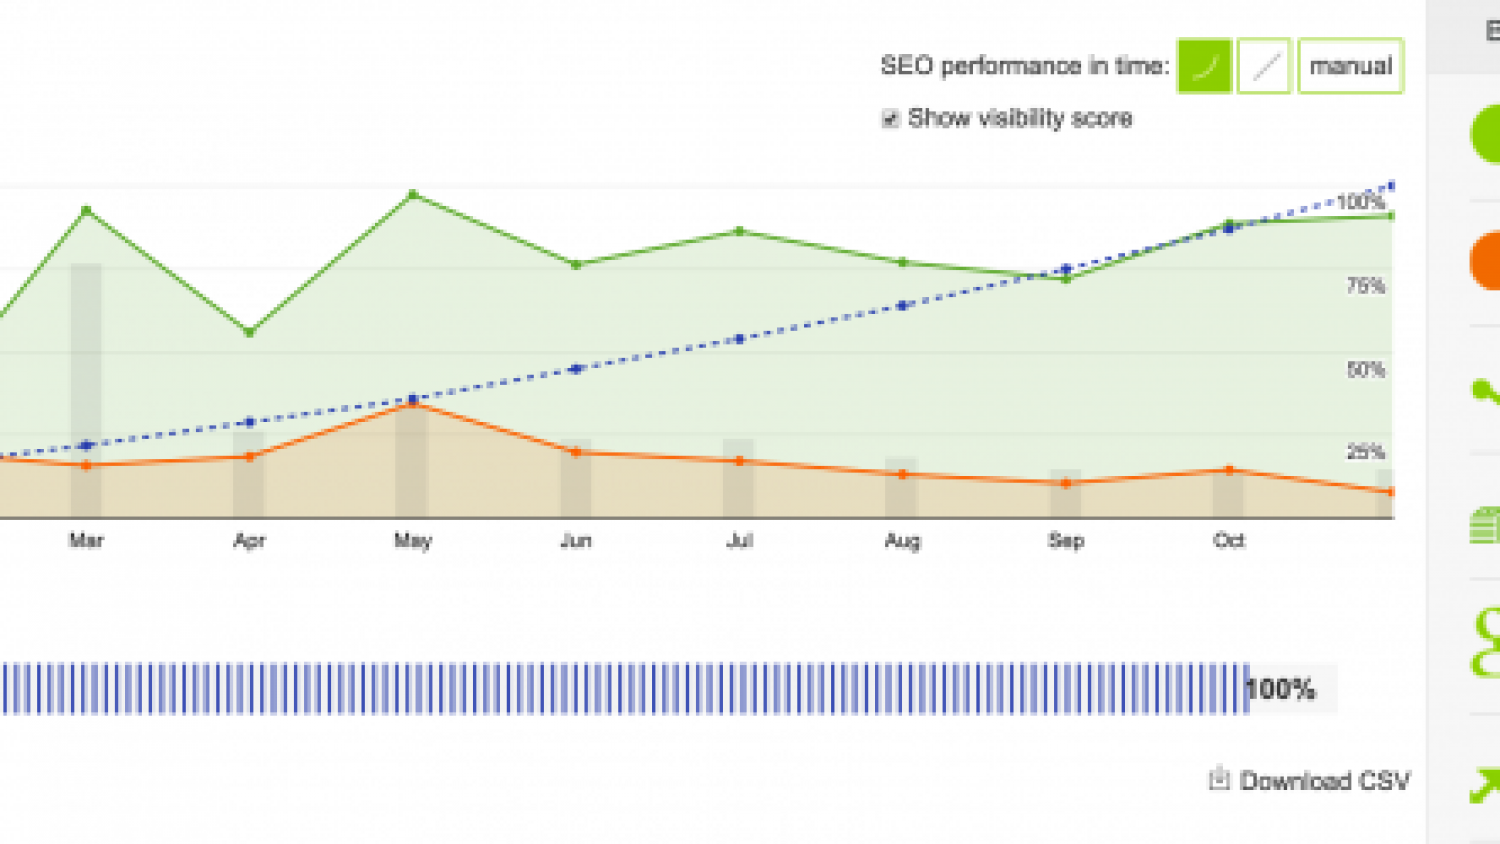 SEOmonitor Software Review: A Top SEO Tool for Ranking in Google